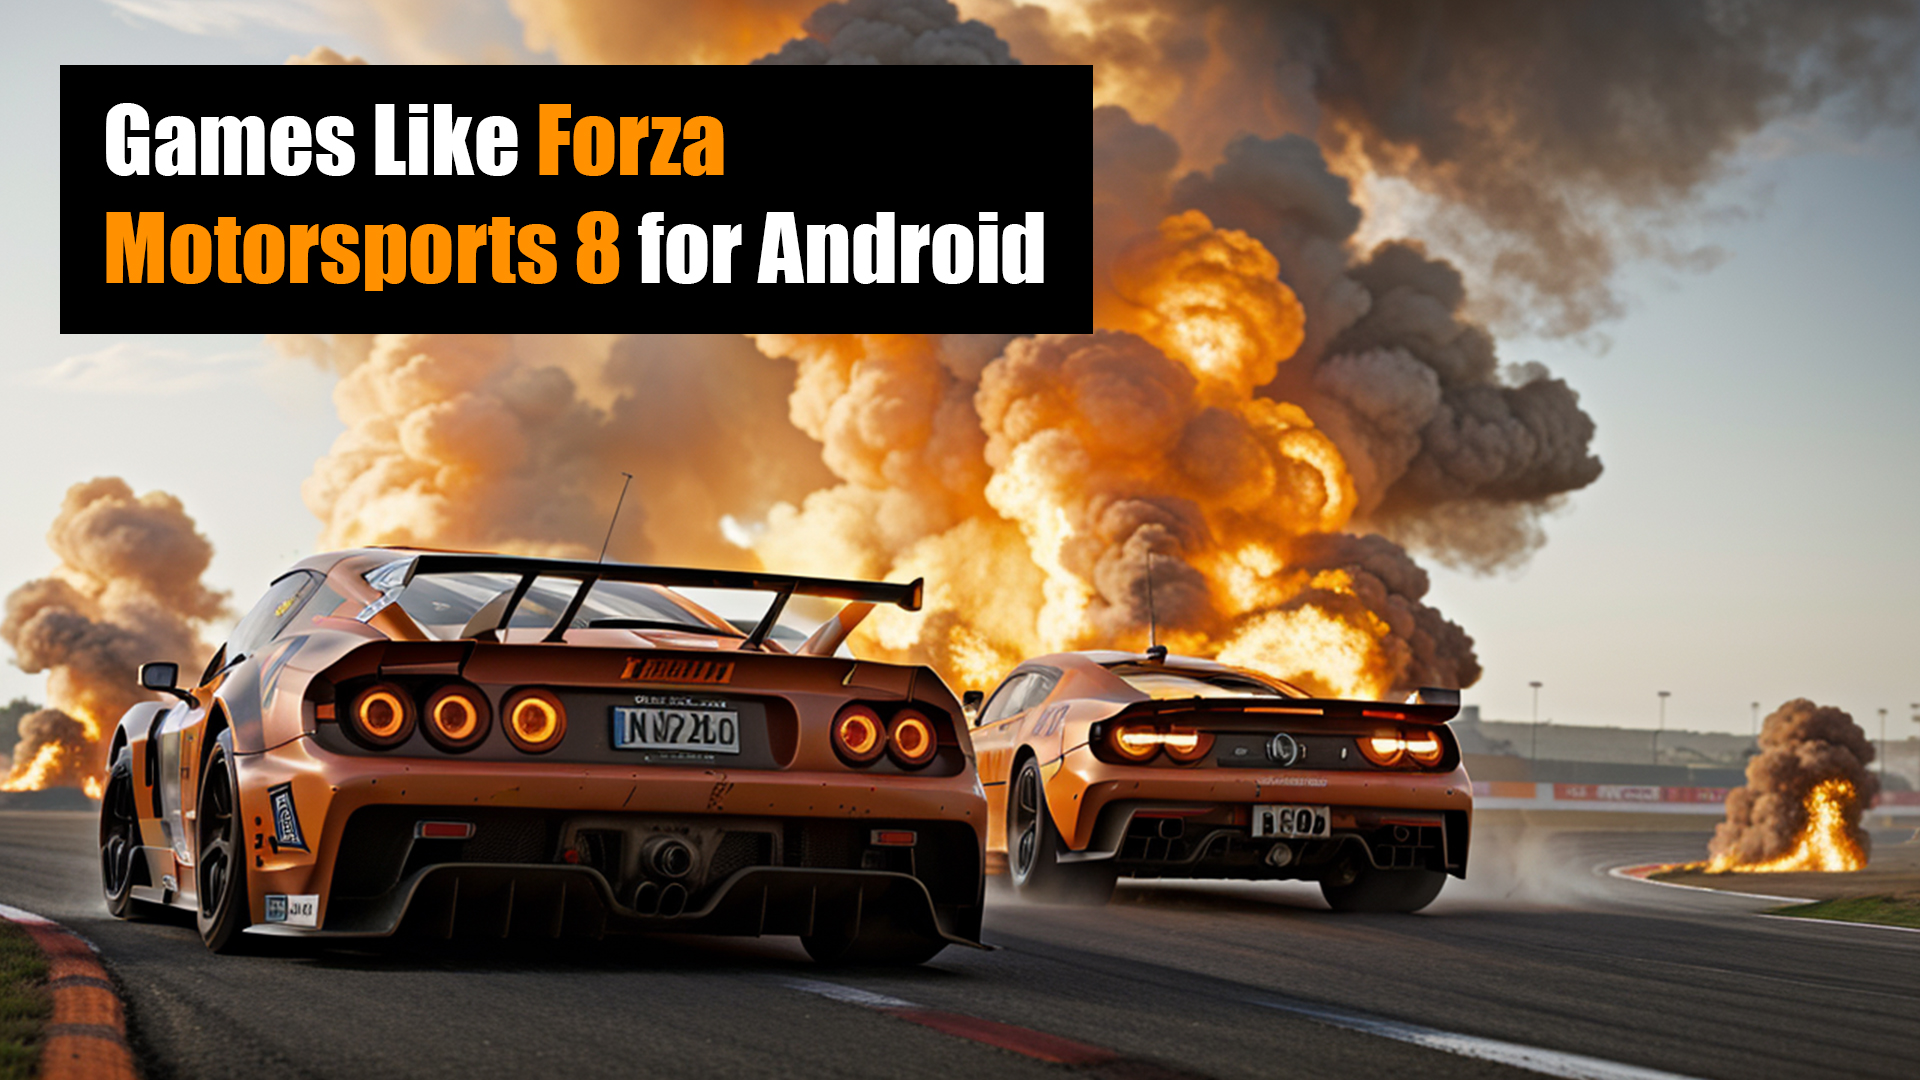 Games like Forza Motorsports 8 for Android